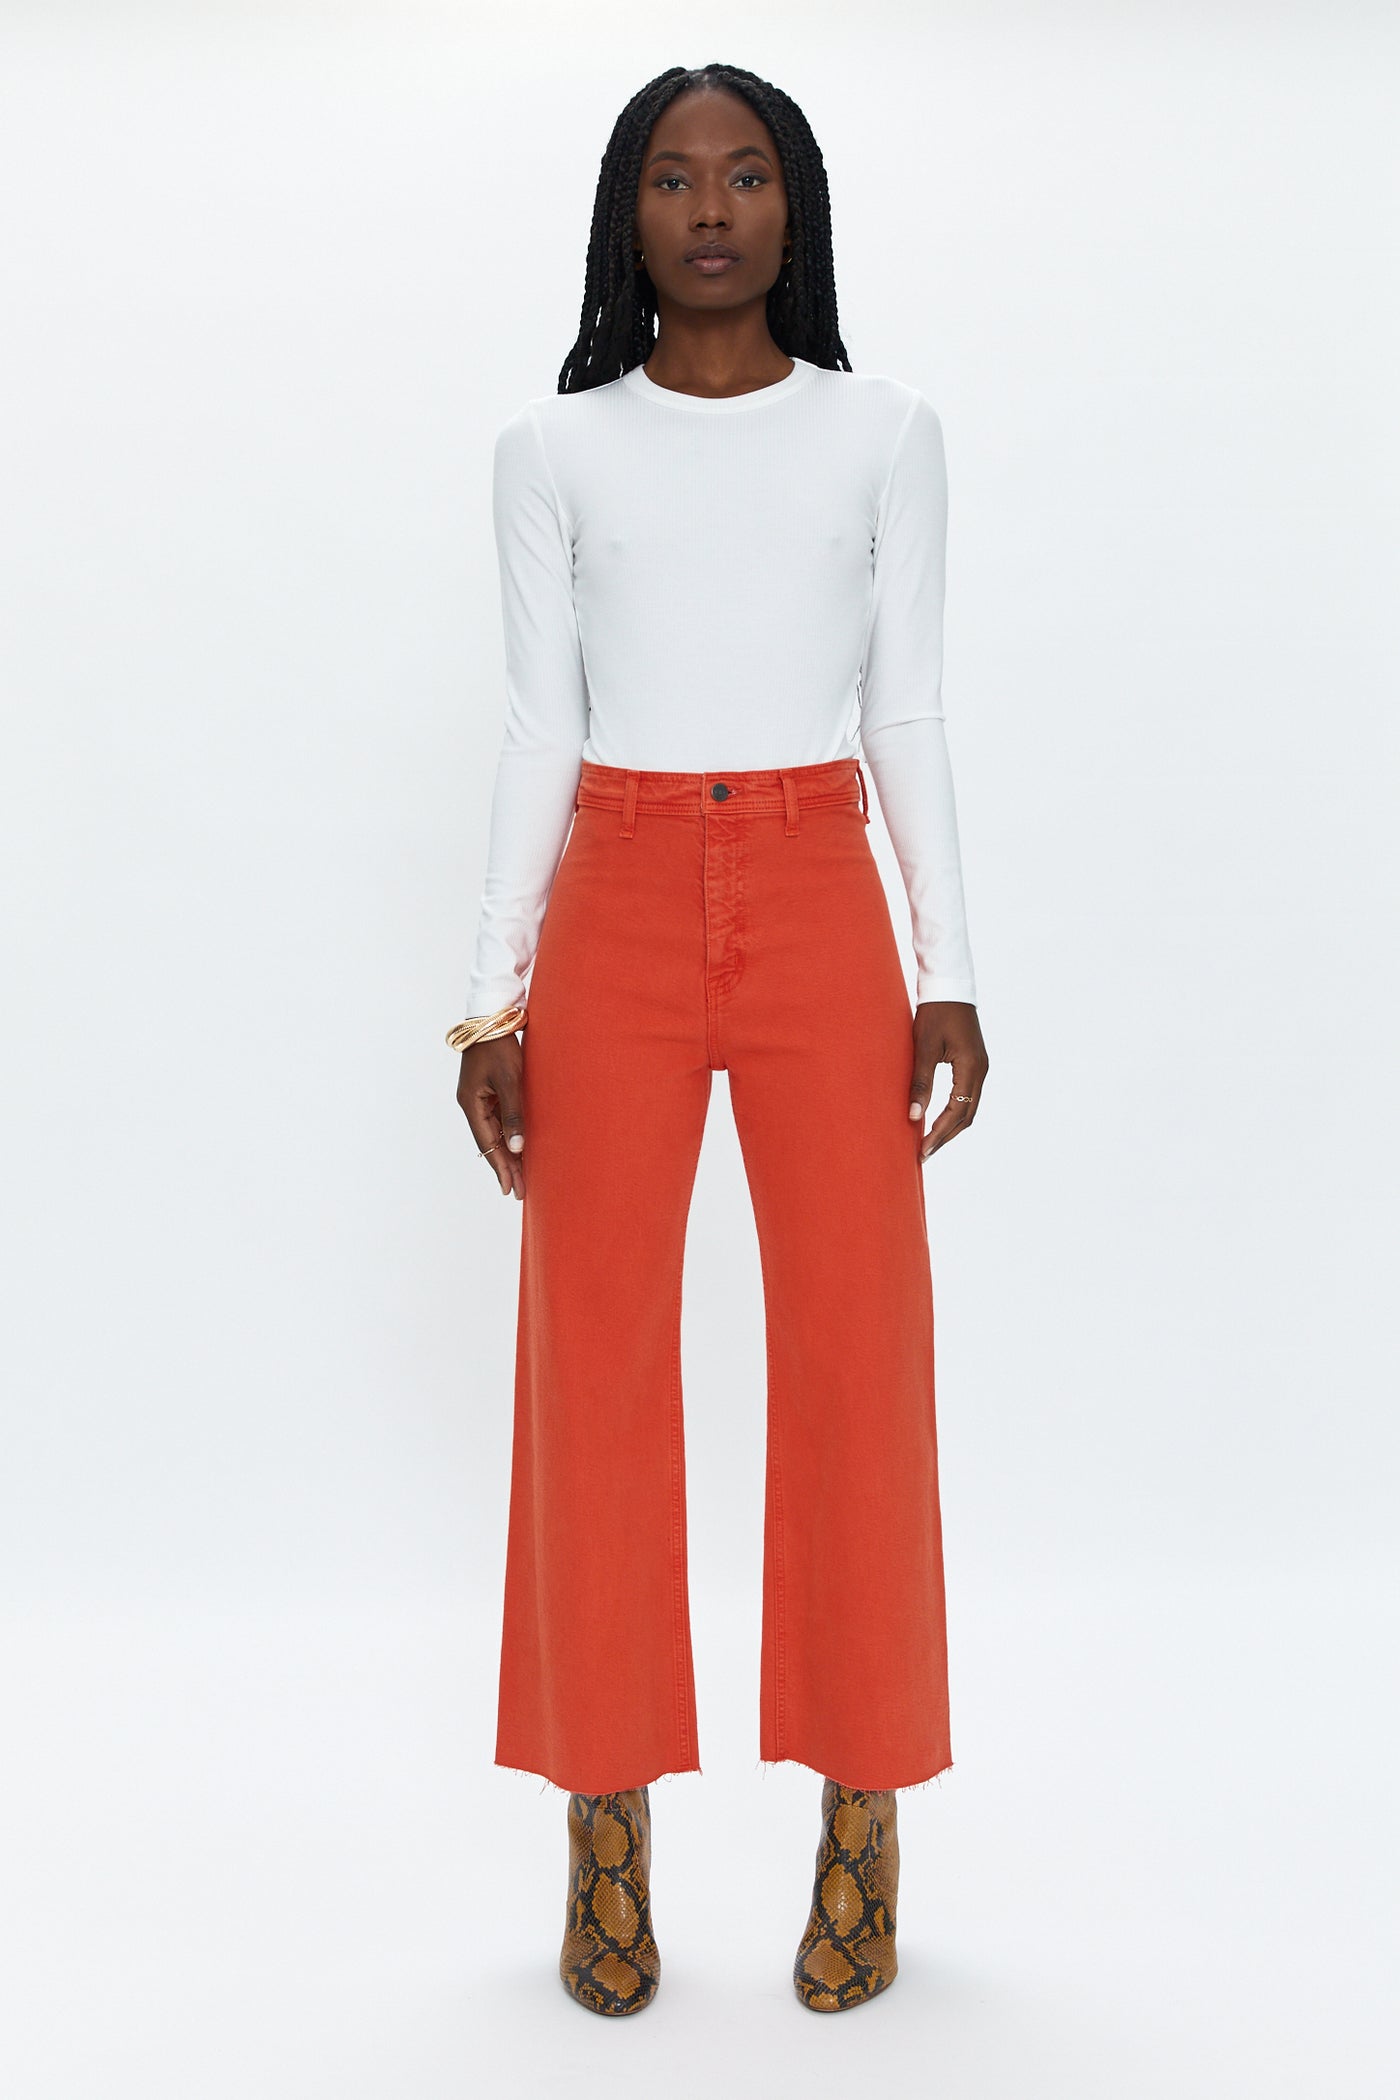 Buttoned-Back Crop + High Waist Pants  Wide leg trousers outfit, White  tank dress, High waisted pants outfit